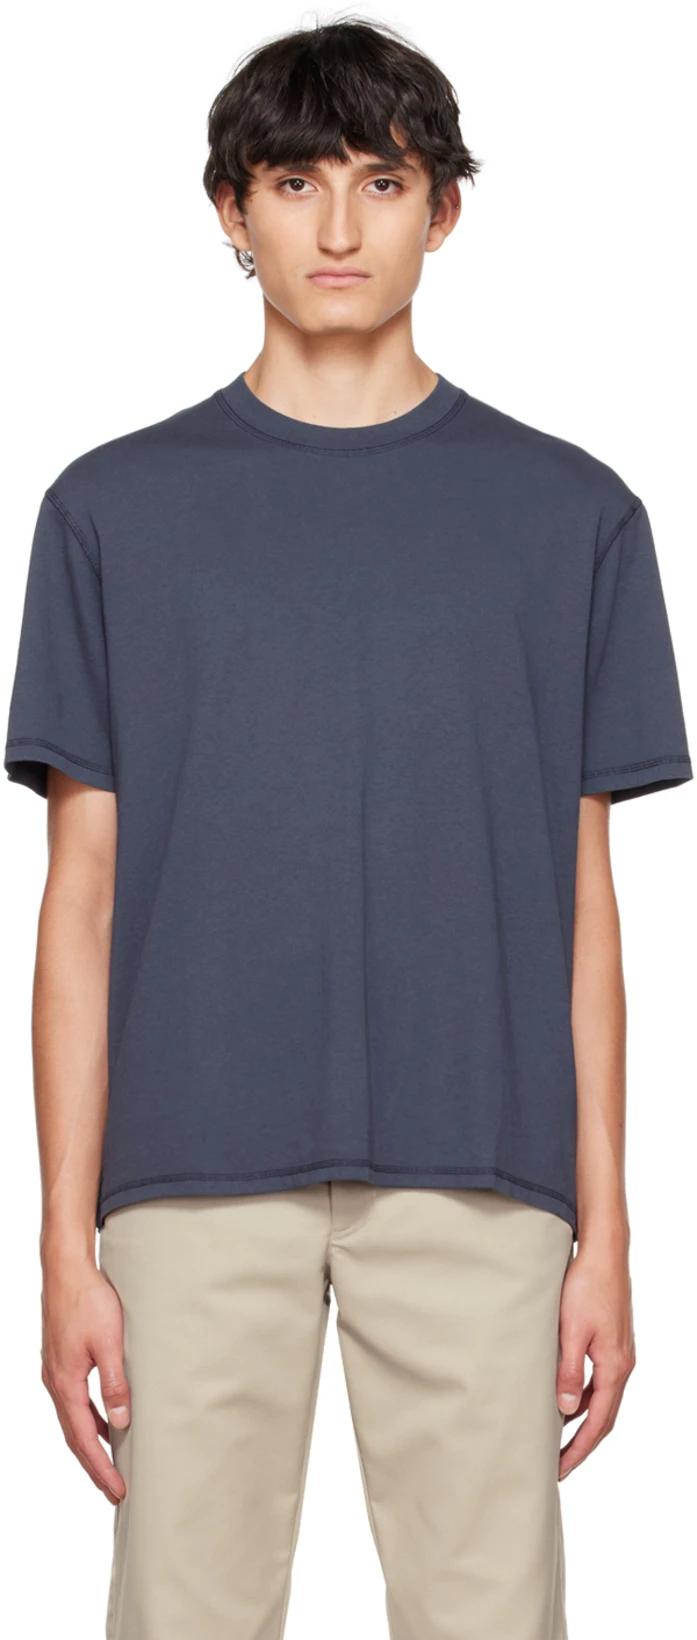 Navy Wrks T-Shirt by AFFXWRKS